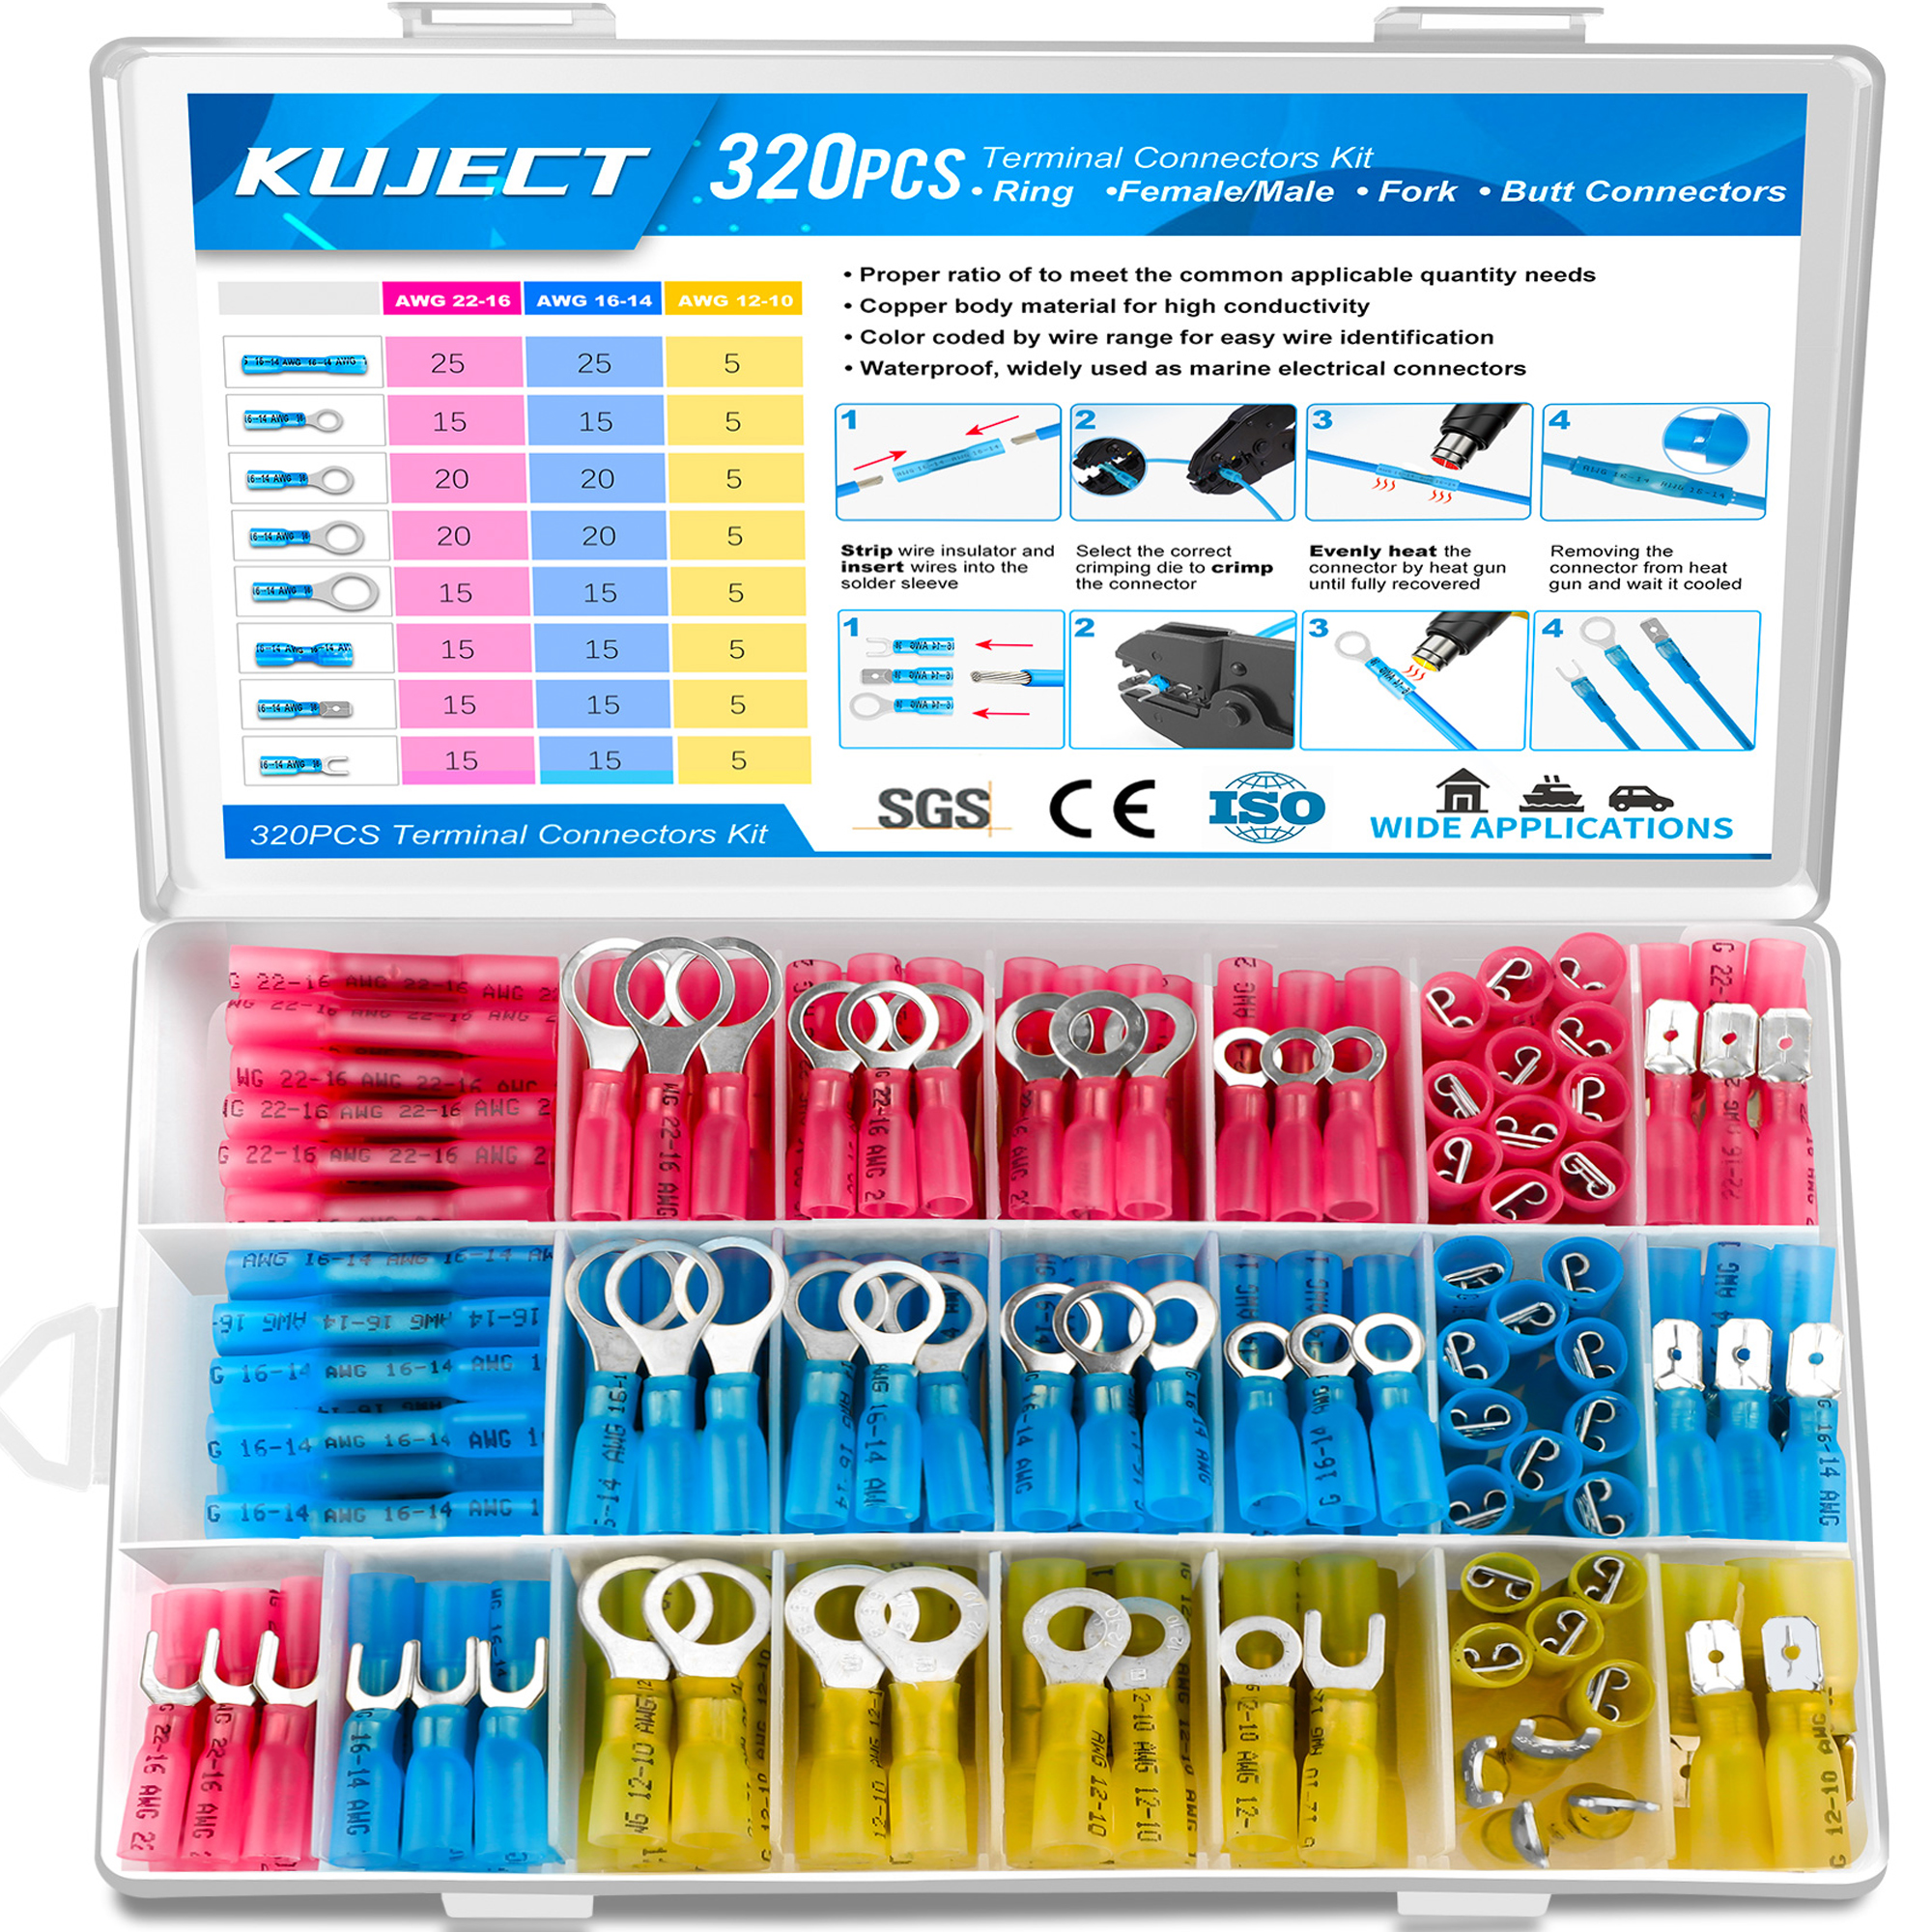 Kuject 320 PCS Heat Shrink Wire Connectors, Multipurpose Waterproof Electrical  Wire Terminals kit, Insulated Crimp Connectors Ring Fork Spade Butt Splices  for Automotive Marine Boat Truck – Kuject